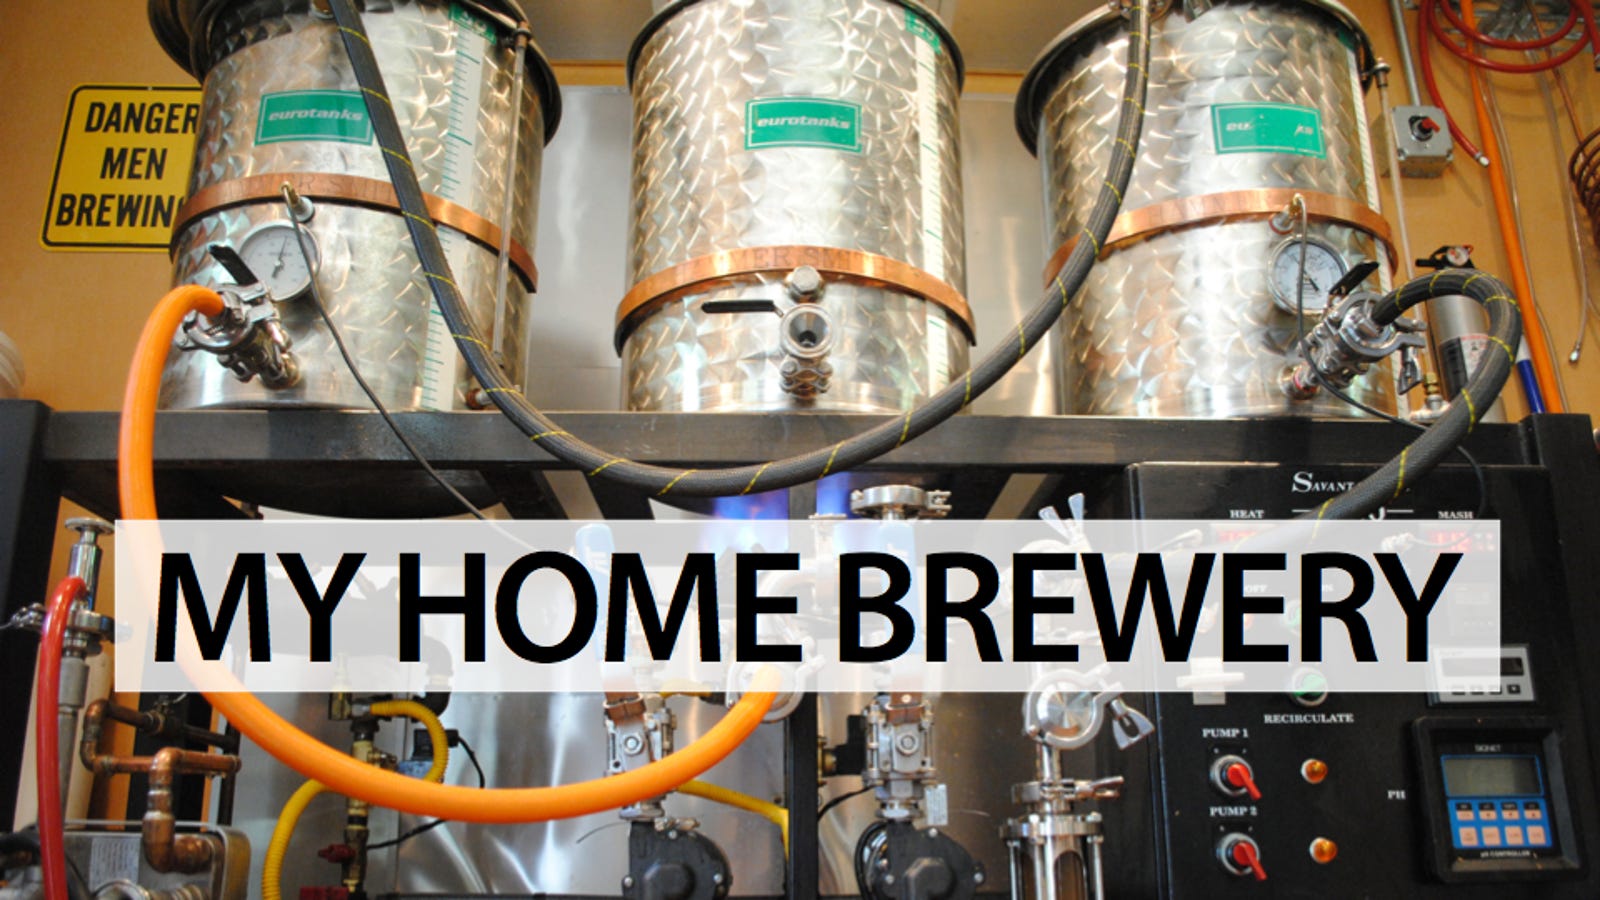 The Home Brewing Laboratory of Every Beer Drinker's Dreams